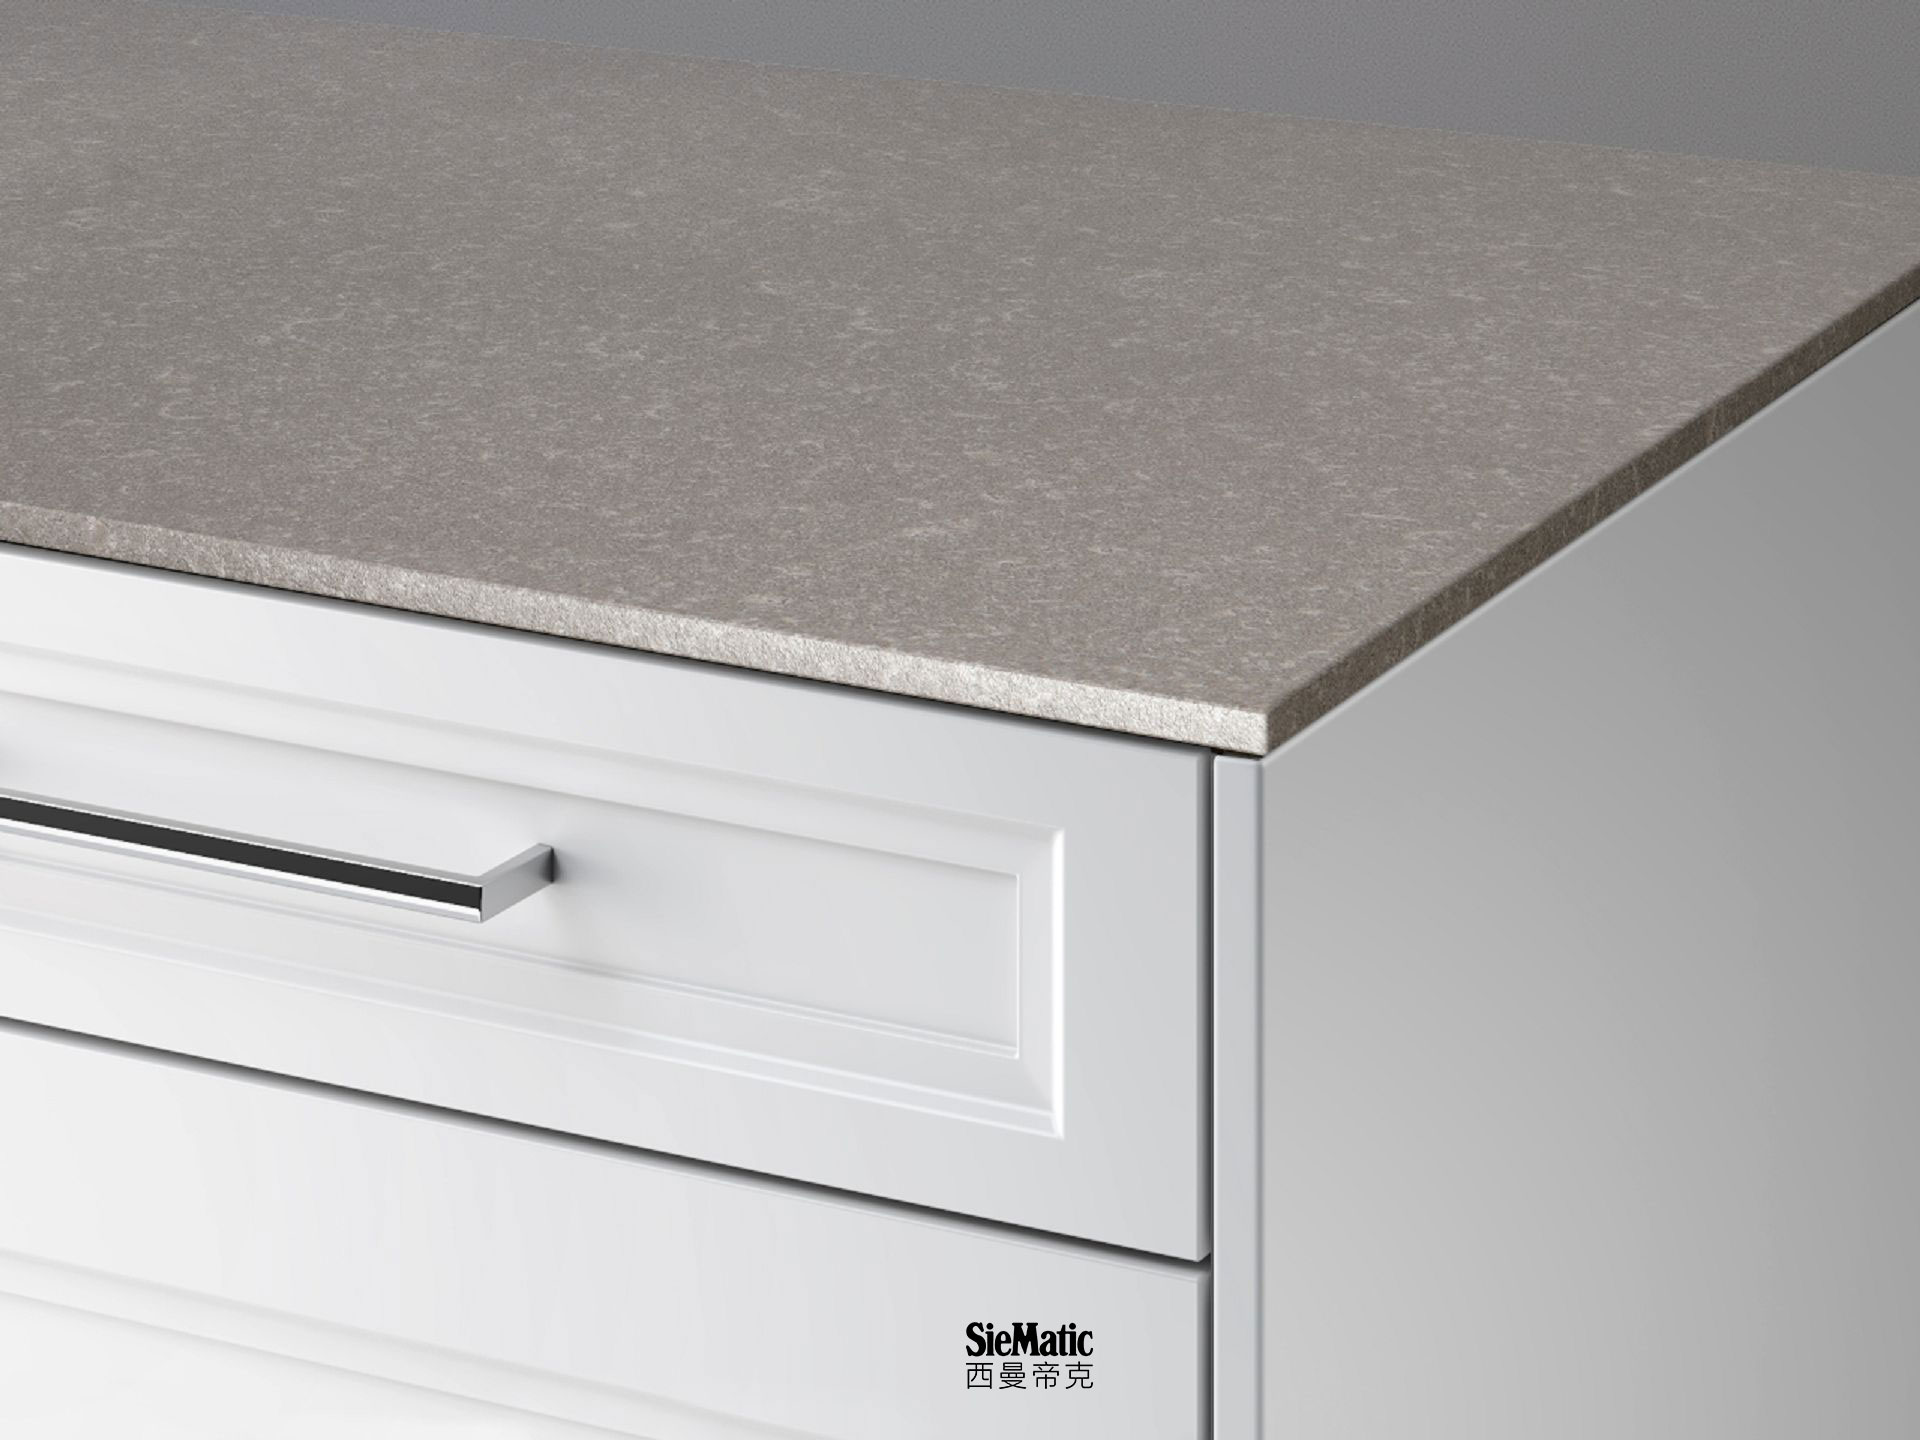 SieMatic StoneDesign kitchen countertop in 1 cm thickness look